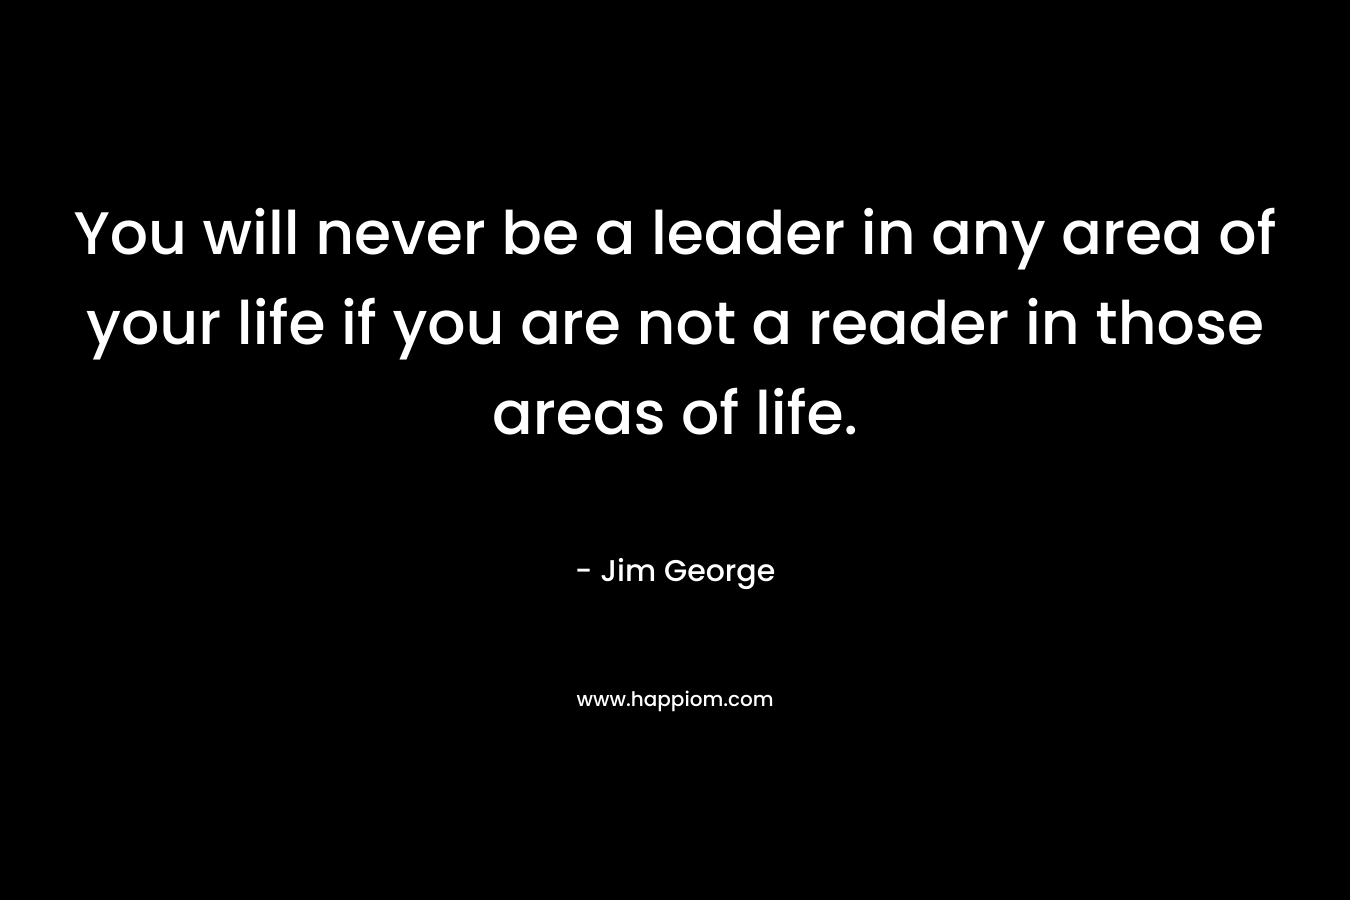 You will never be a leader in any area of your life if you are not a reader in those areas of life. – Jim George